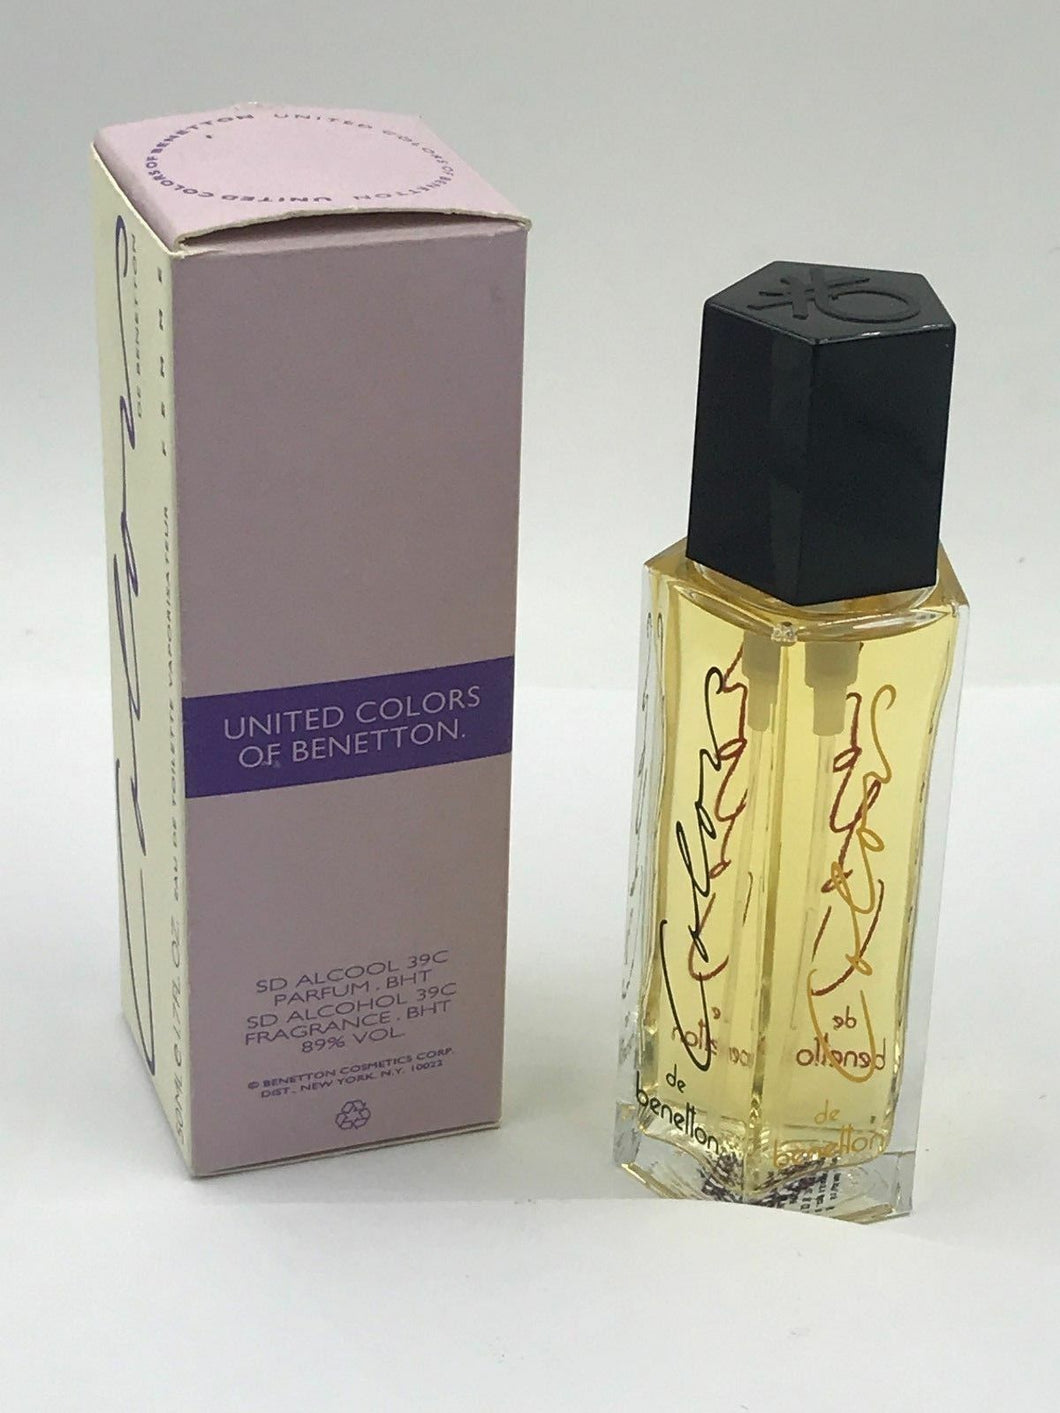 Colors de Benetton for Femme 1 oz 30 ml by United Colors of Benetton RARE IN BOX - Perfume Gallery